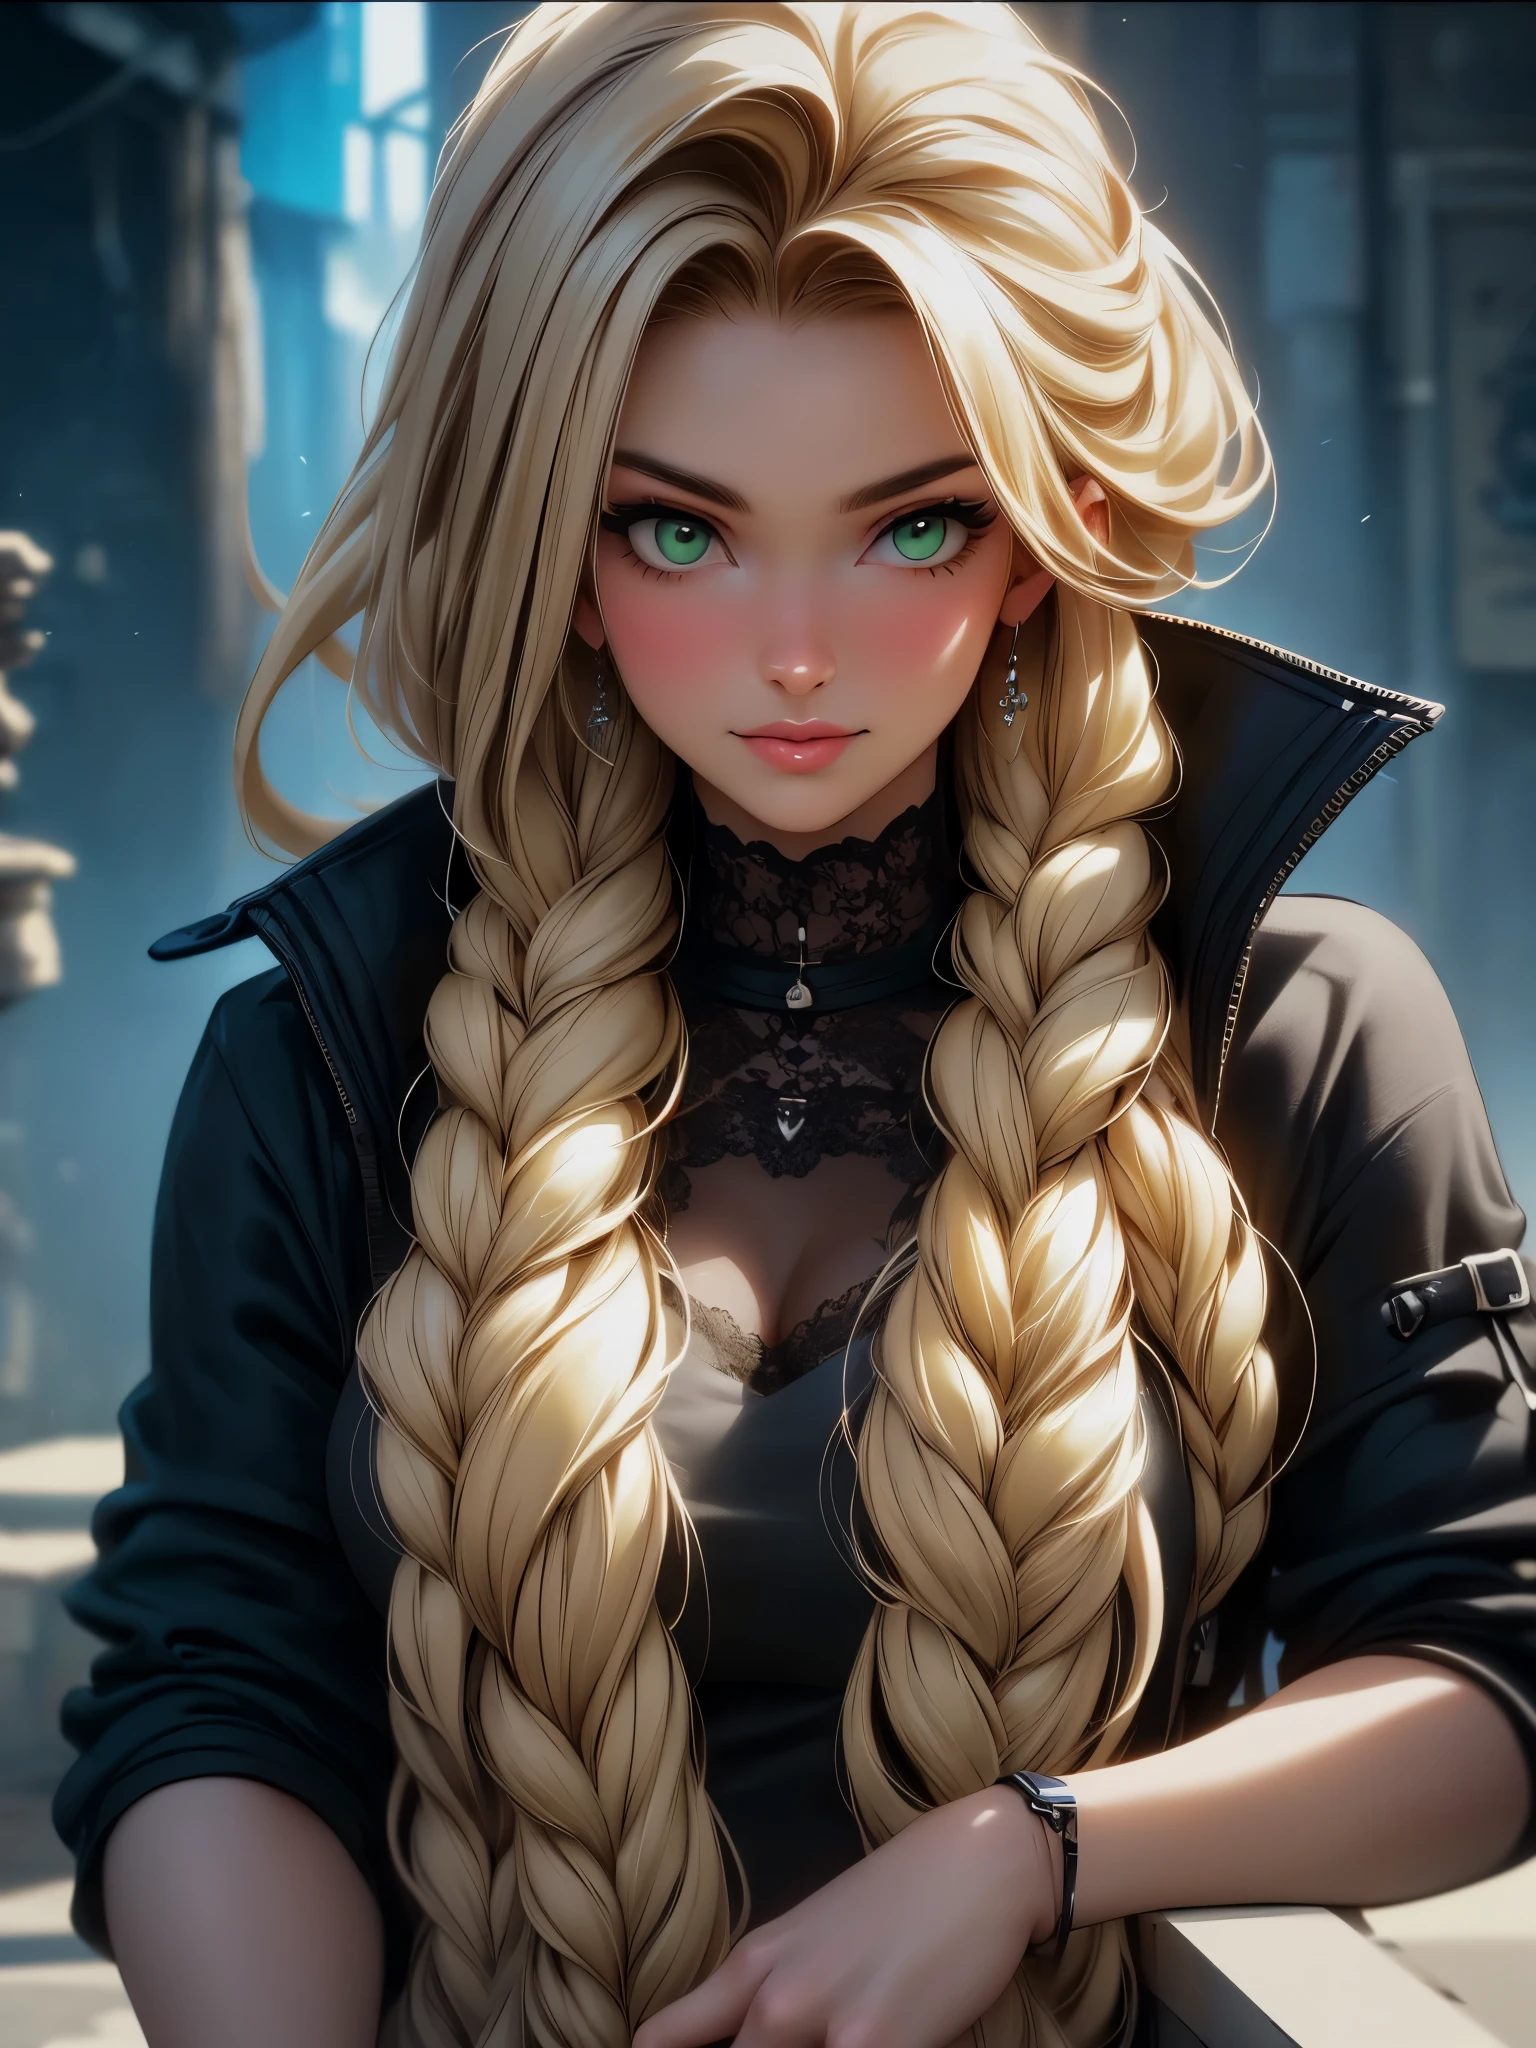 ((wide shot: 1.6)), Unreal Engine: 1.4, CG K ultra-realistic, photorealistic: 1.4, perfectly detailed skin texture: 1.4, ((artwork 1 young woman full body full: 1.5)), ((blonde hair, green eyes, full body lips and a sensual smile:1.5)), punk style hairstyle with shaved side:1.3, tattoos, Gatling gun, box, looking at viewer, pose dynamic and sensual, beating, ammunition belt, gloves, big breasts, shooting, Extremely detailed: 1.4, more detailed, optical mix, fun patterns, animated texture, unique visual effect, pink leather miniskirt:1.3, pink jacket:1.3, masterpiece, in the background an abandoned place with junk, ((colors, cyan, green, pink, brown: 1.2 )), ((8k realistic digital art)), 32k